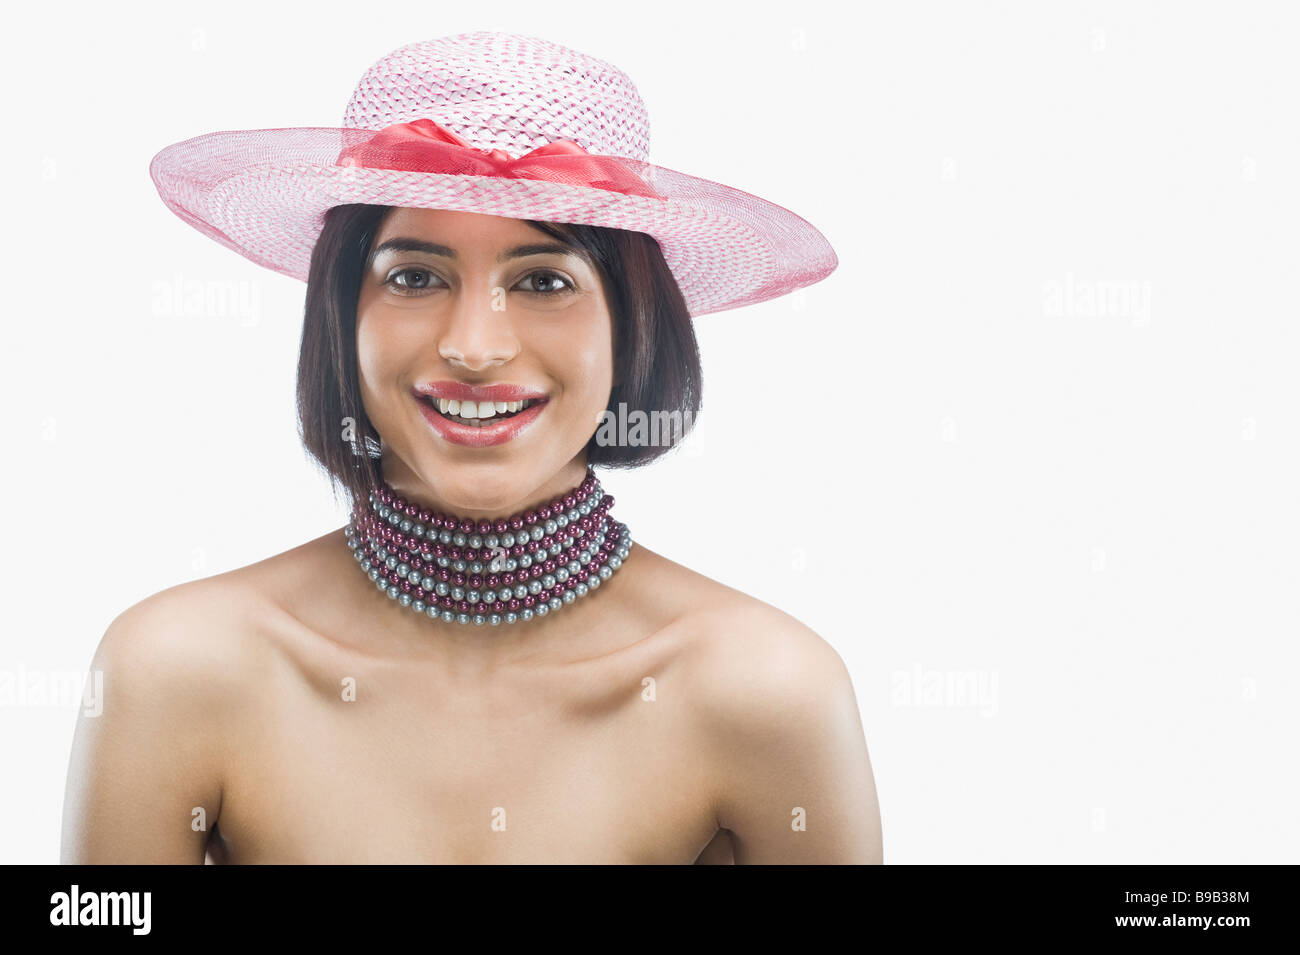 Portrait of a woman smiling Stock Photo